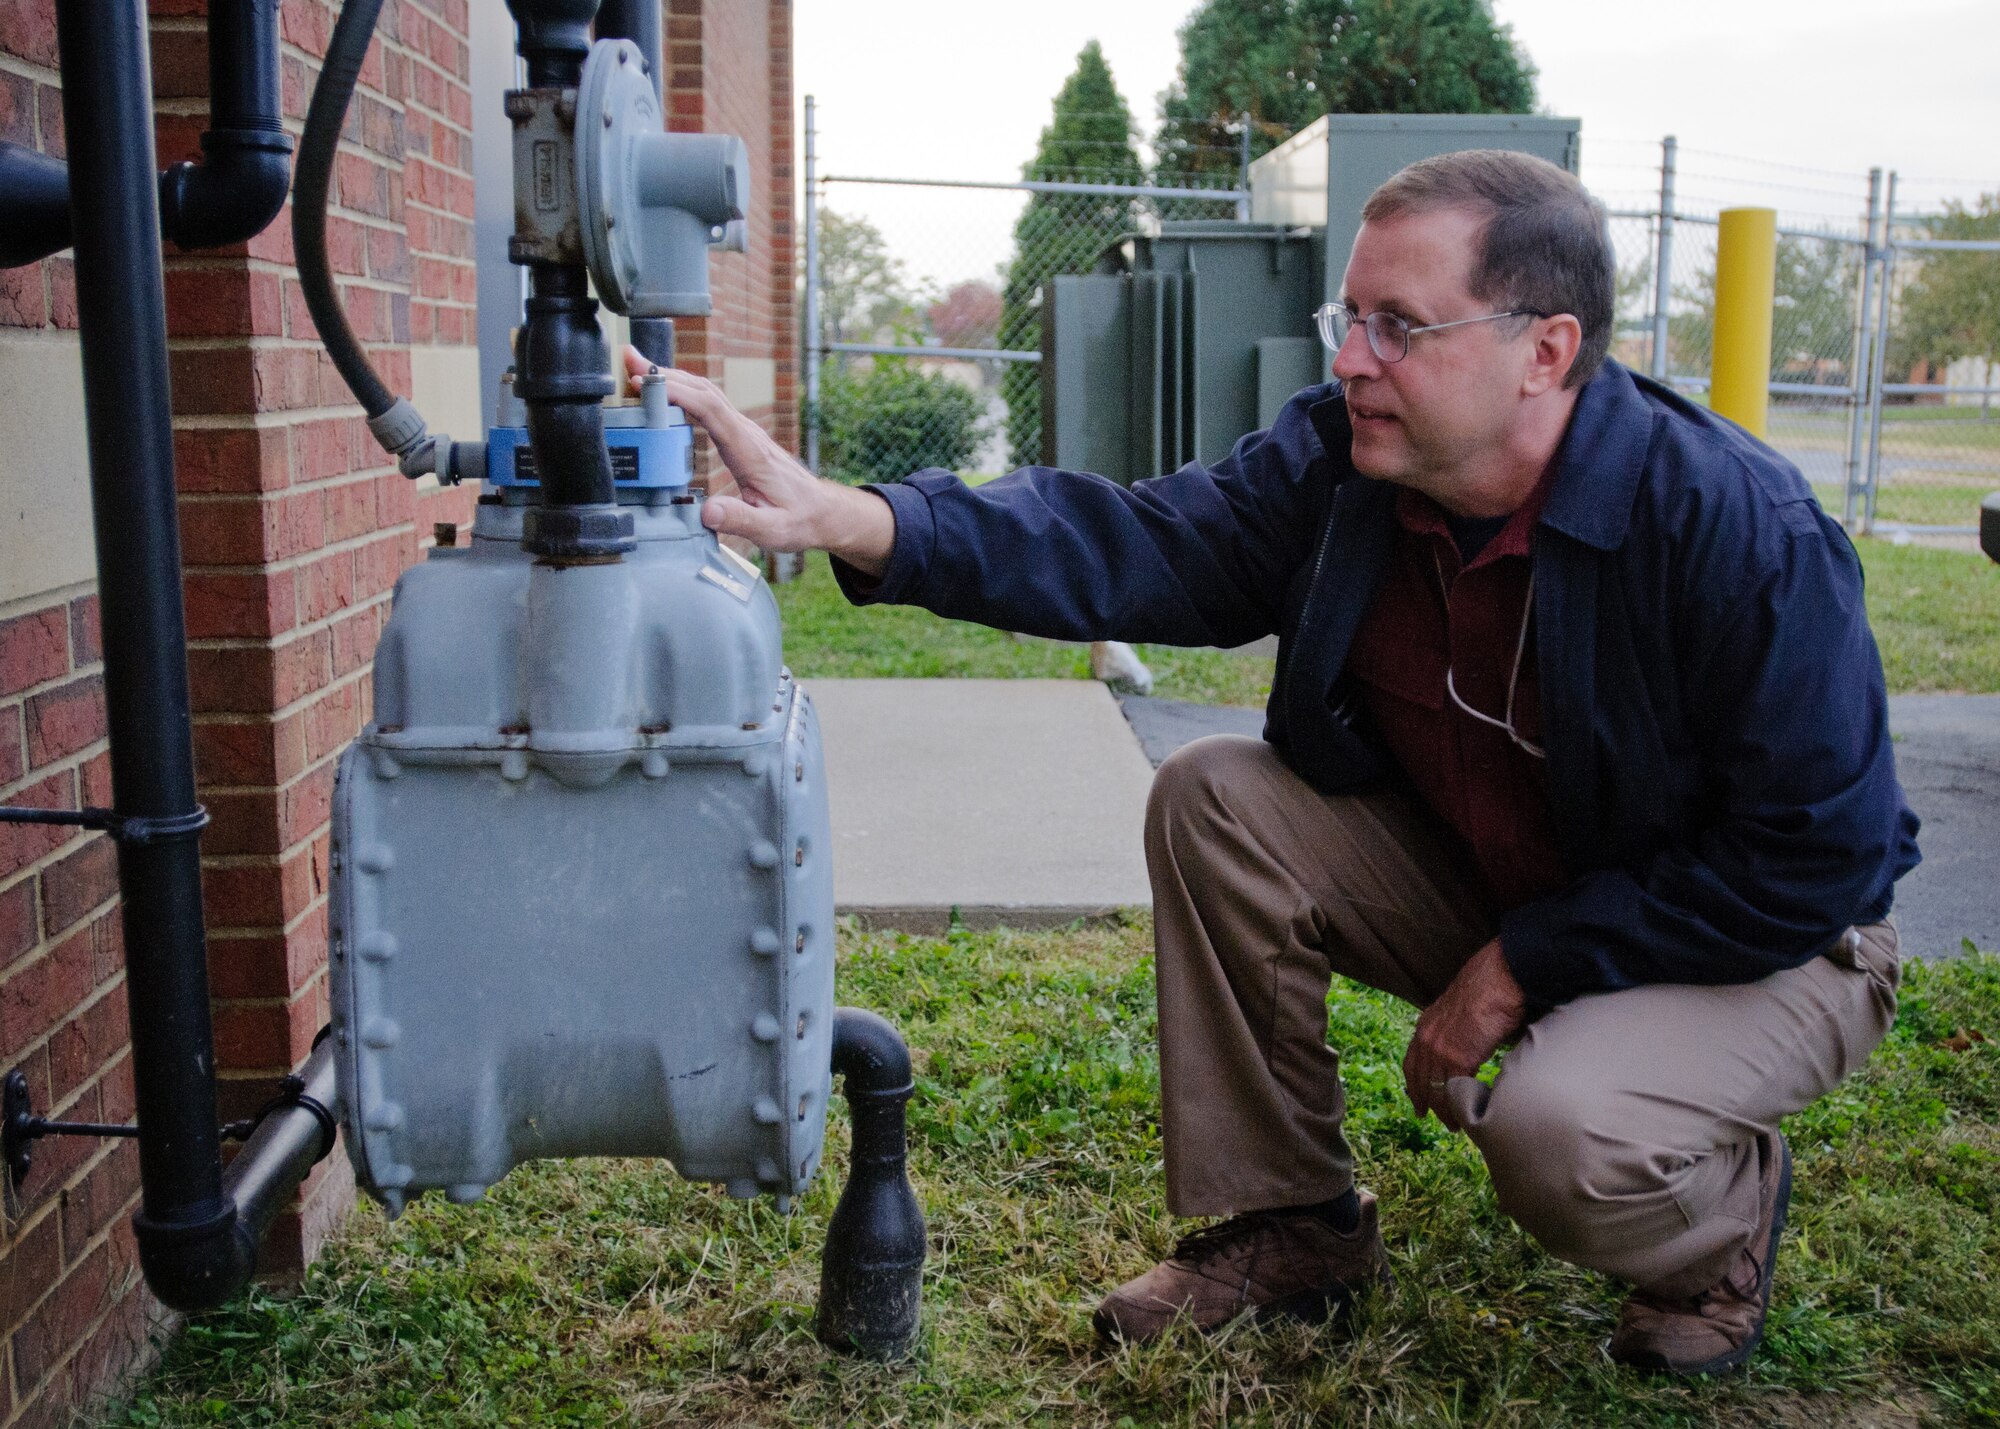 Tom Spalding, an environmental technician for the 123rd Airlift Wing, checks a gas meter Oct. 12, 2012, at the Kentucky Air National Guard base in Louisville, Ky. Many of the meters on base wirelessly transmit energy-usage data for monthly reports, helping officials identify opportunities to reduce energy consumption. (Kentucky Air National Guard photo by Master Sgt. Phil Speck)